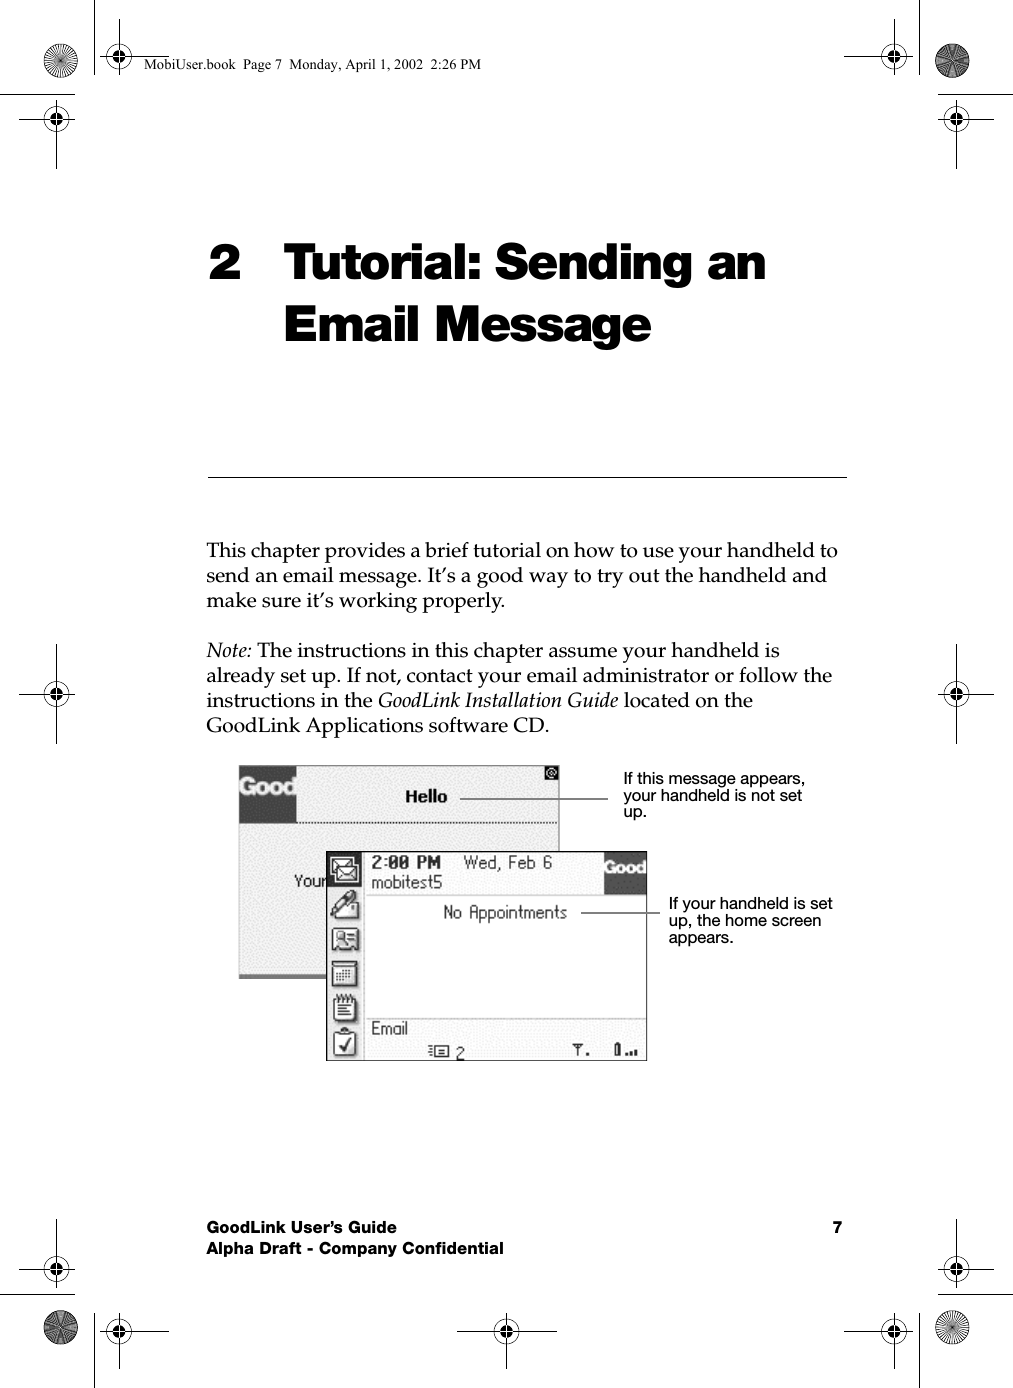 GoodLink User’s Guide 7Alpha Draft - Company Confidential2 Tutorial: Sending an Email MessageThis chapter provides a brief tutorial on how to use your handheld to send an email message. It’s a good way to try out the handheld and make sure it’s working properly.Note: The instructions in this chapter assume your handheld is already set up. If not, contact your email administrator or follow the instructions in the GoodLink Installation Guide located on the GoodLink Applications software CD.If this message appears, your handheld is not set up.If your handheld is set up, the home screen appears.MobiUser.book  Page 7  Monday, April 1, 2002  2:26 PM